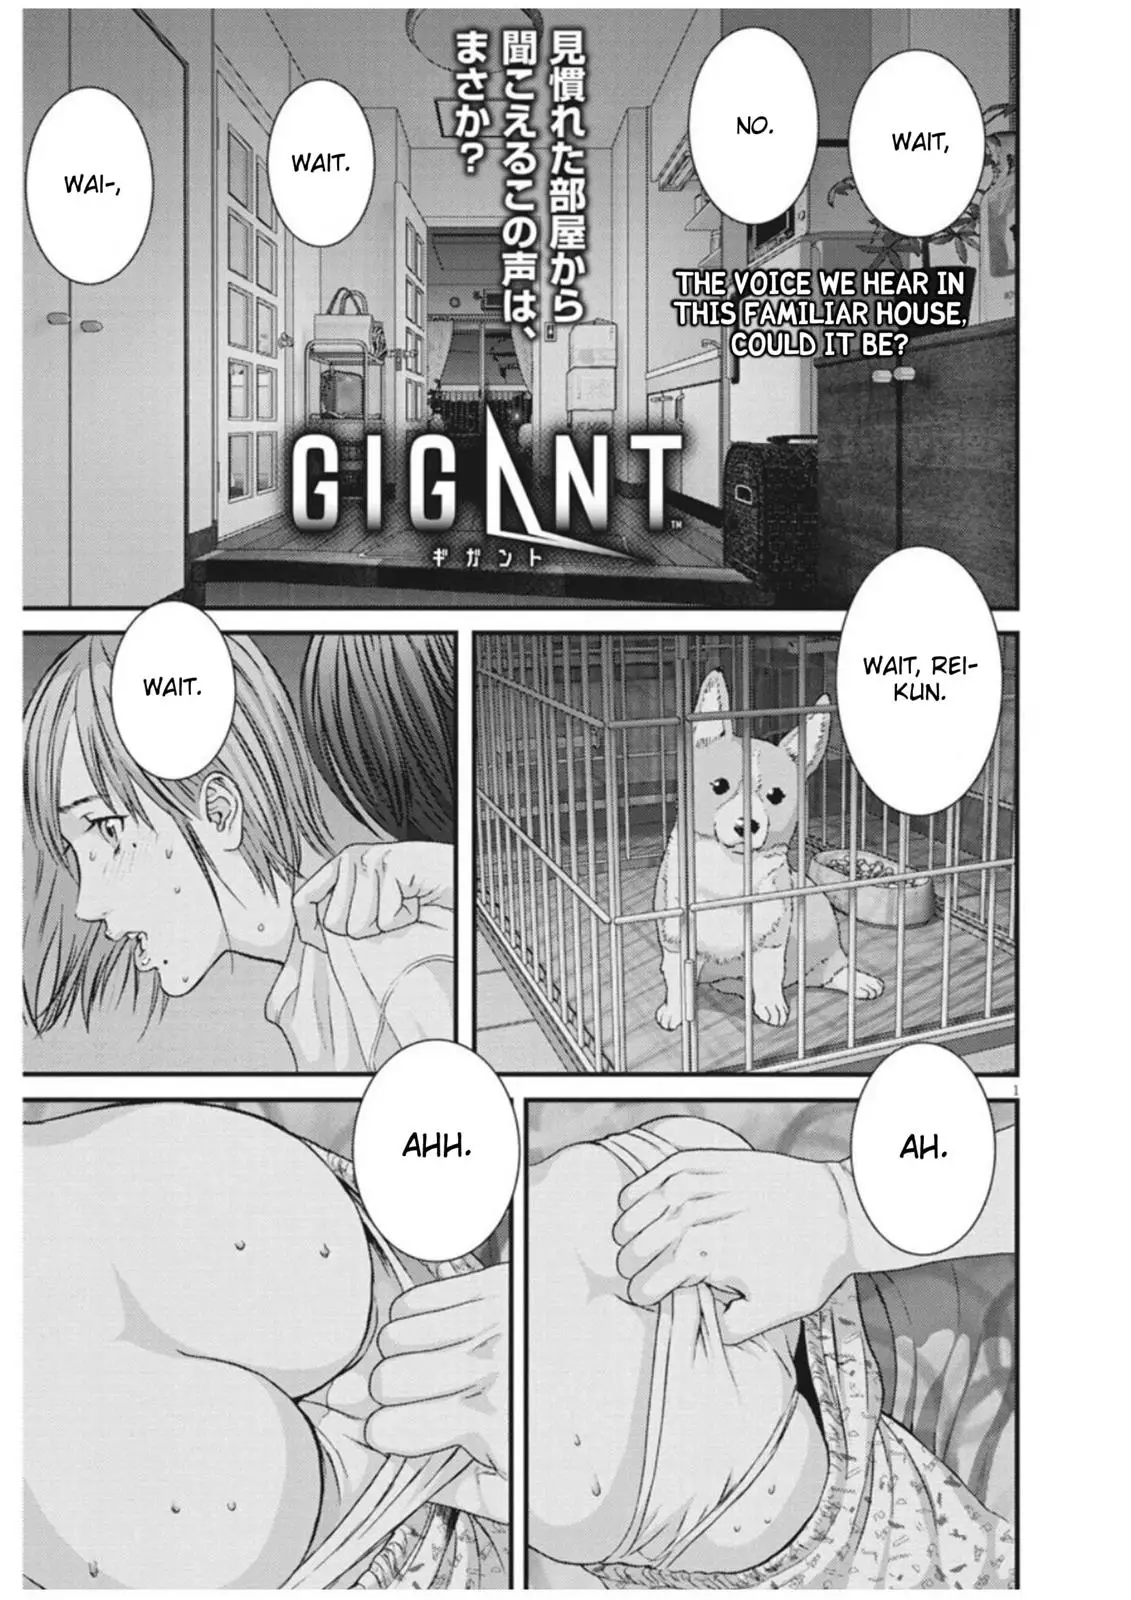 Gigant - 11 page 1